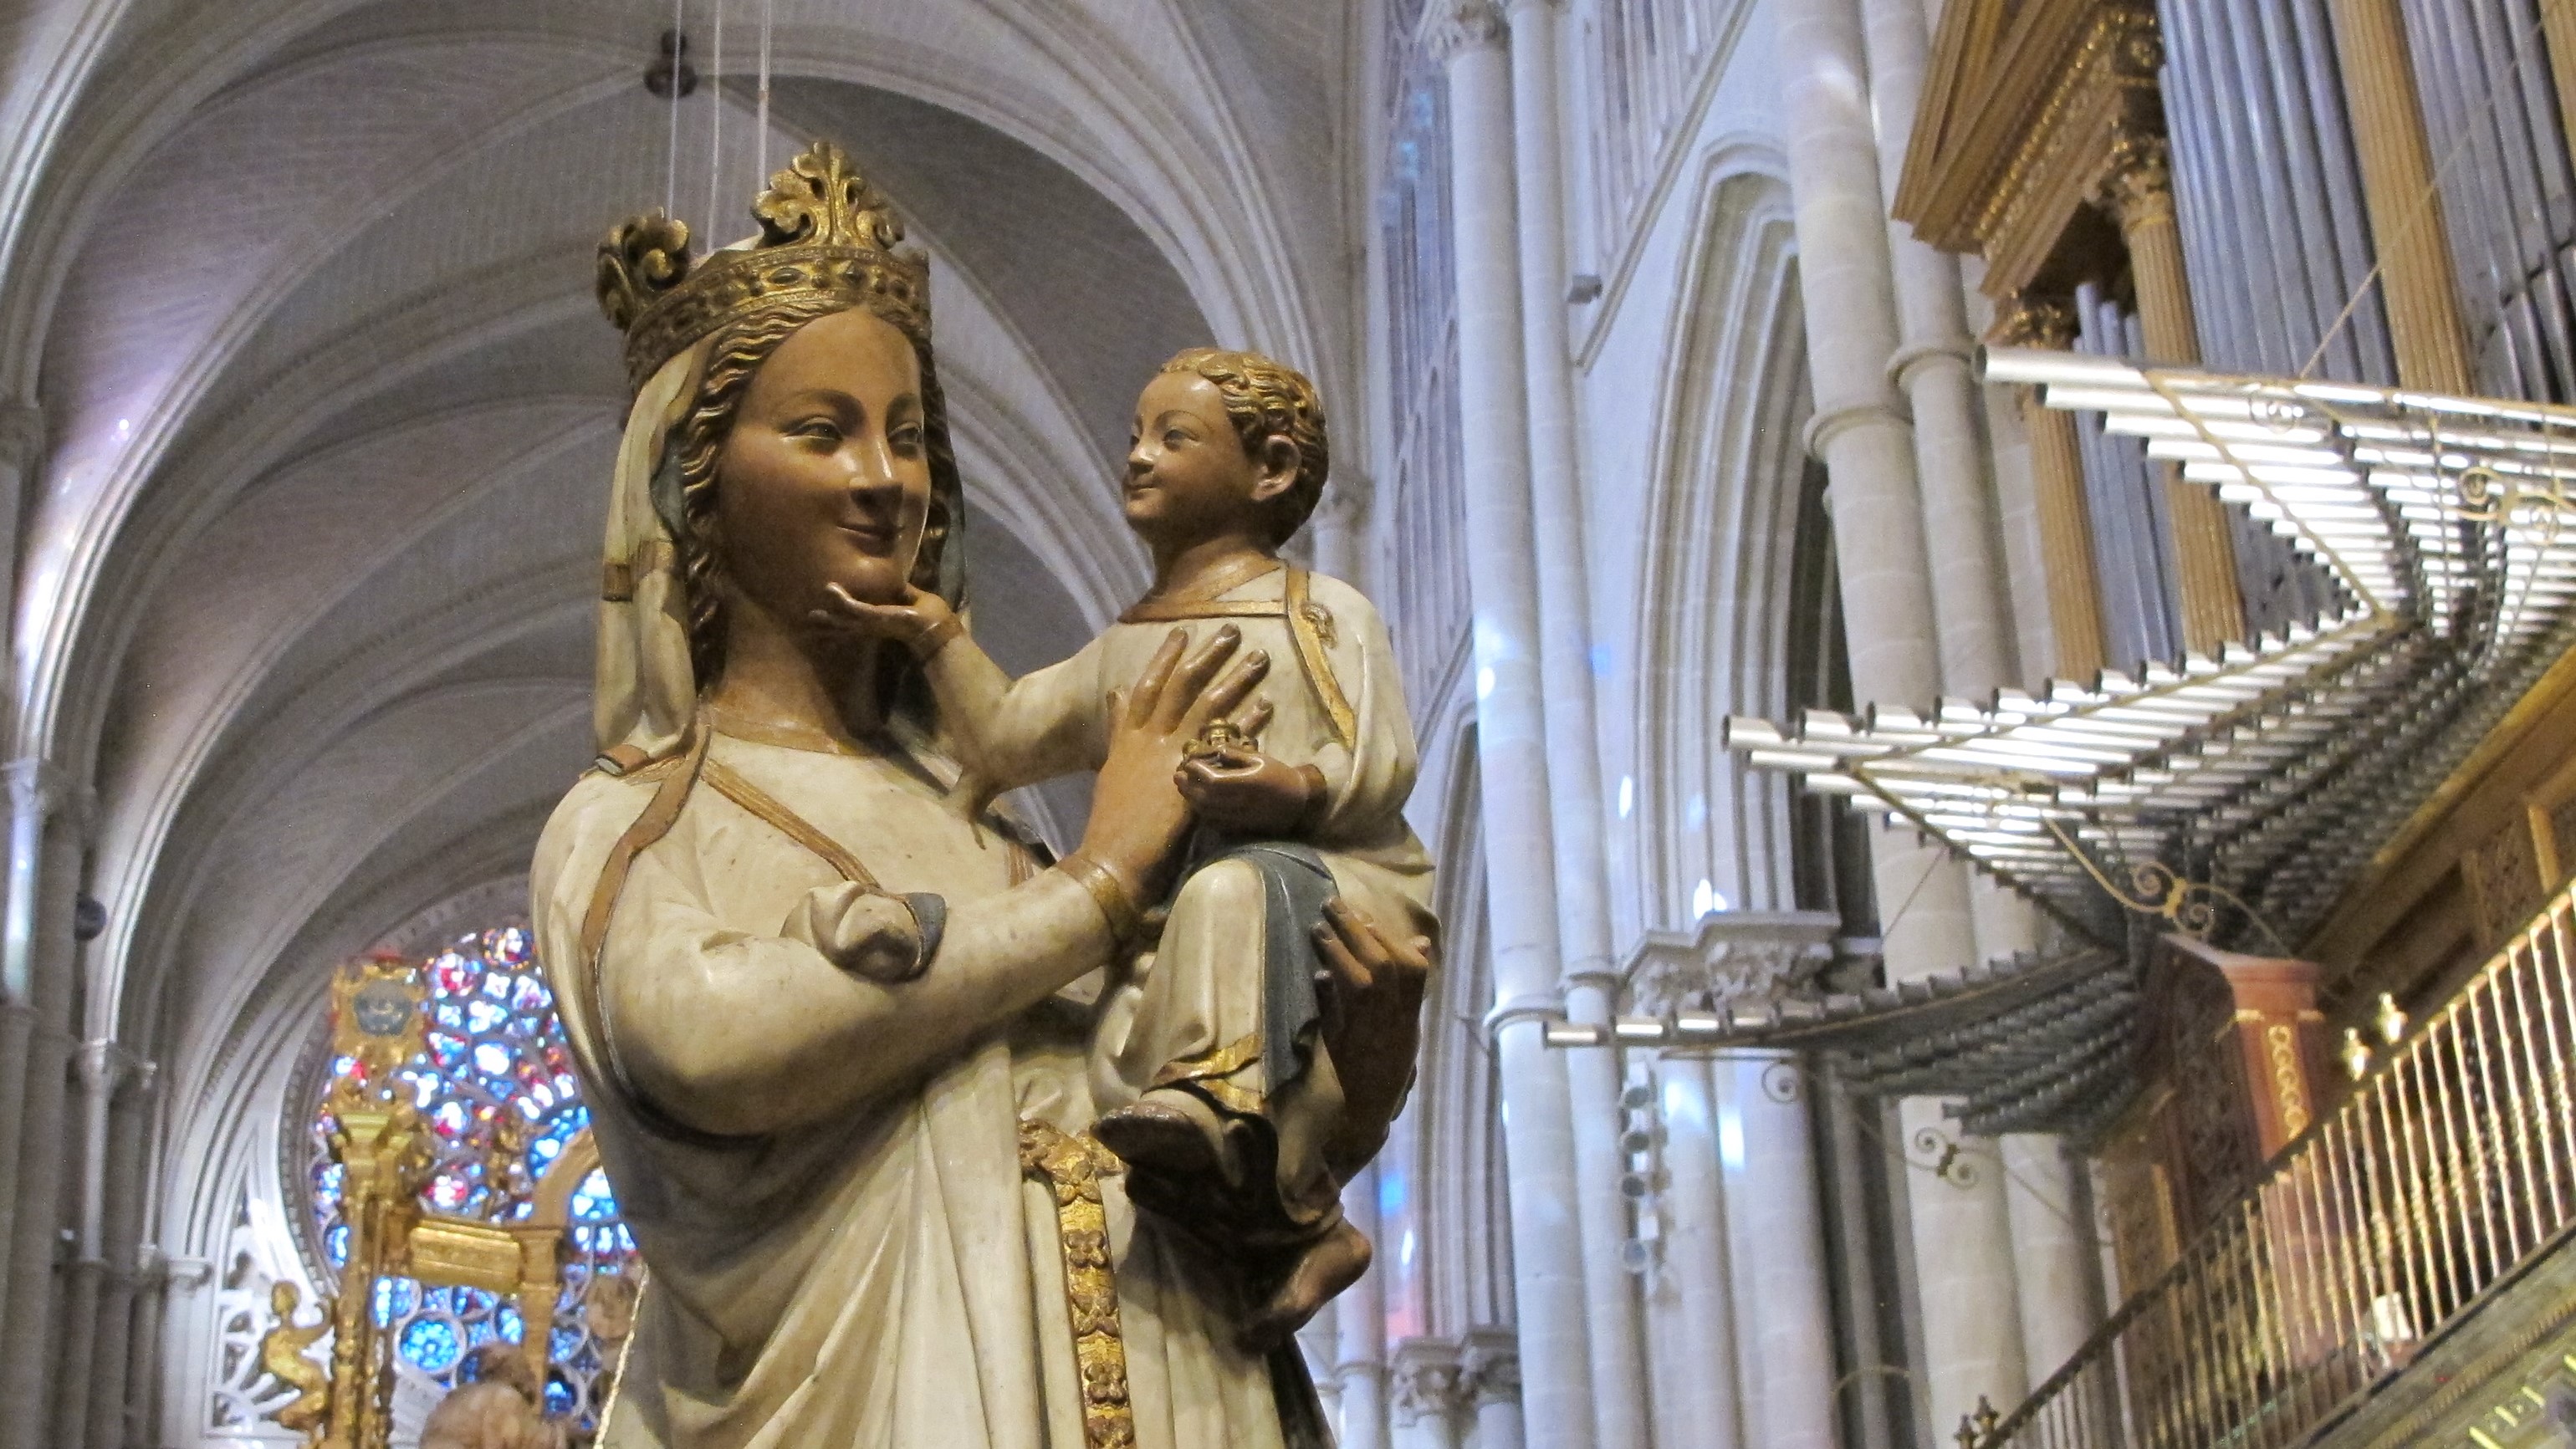 Virgin Blanca. Baby Jesus and Mary statue in the Cathedral at Toledo, Spain. Photo by Barbara Newhall